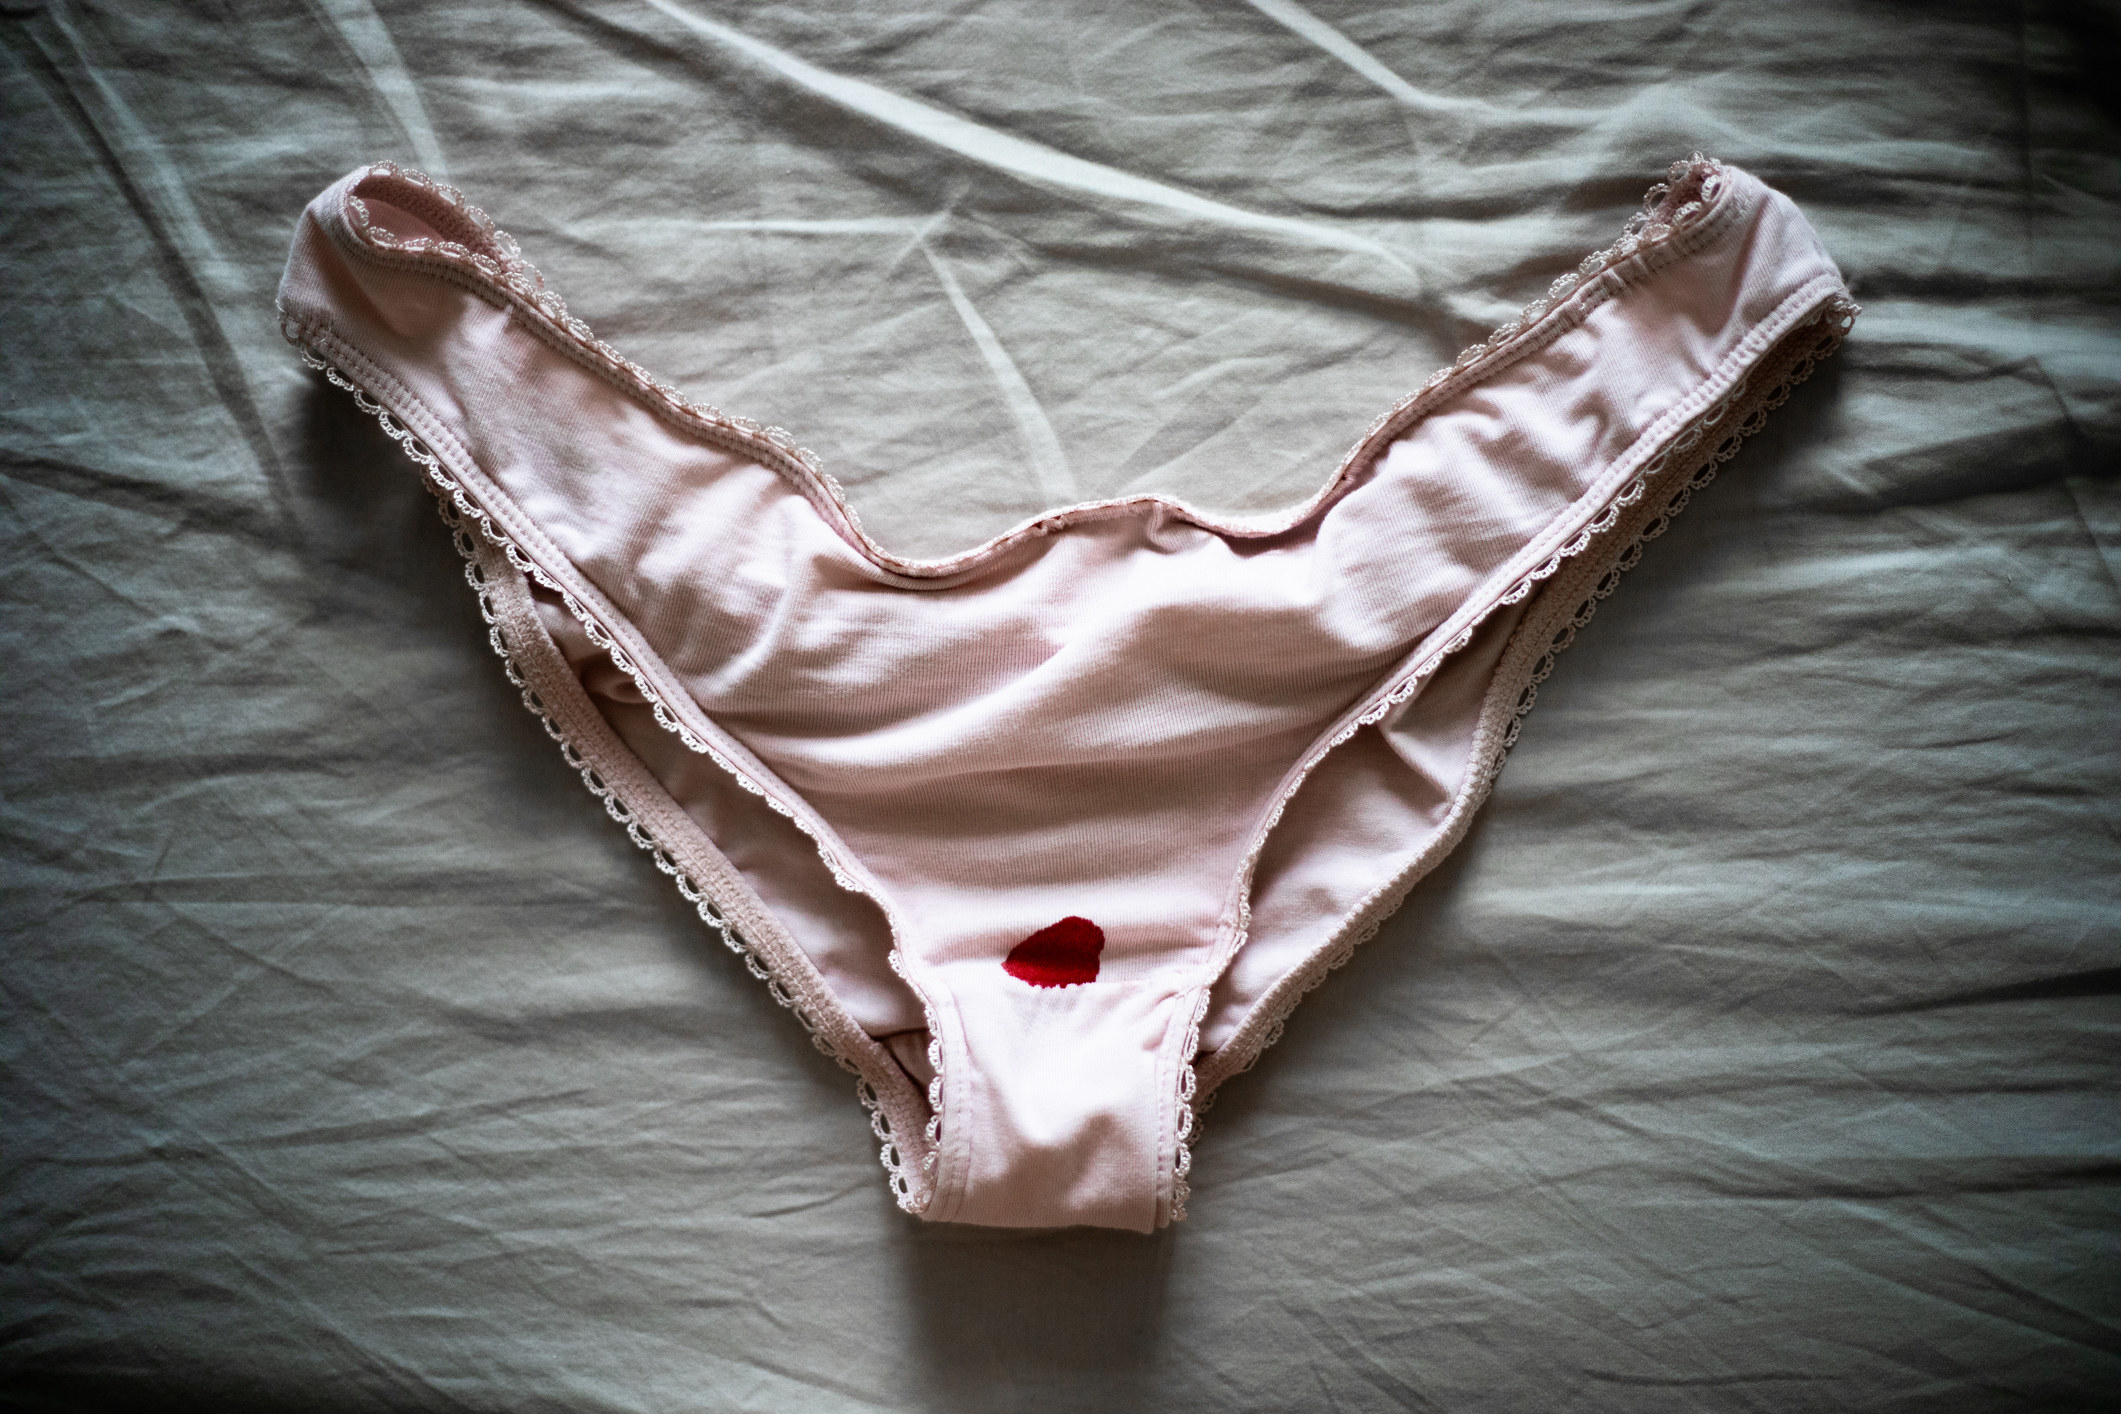 A pair of panties with a bloodstain at the crotch